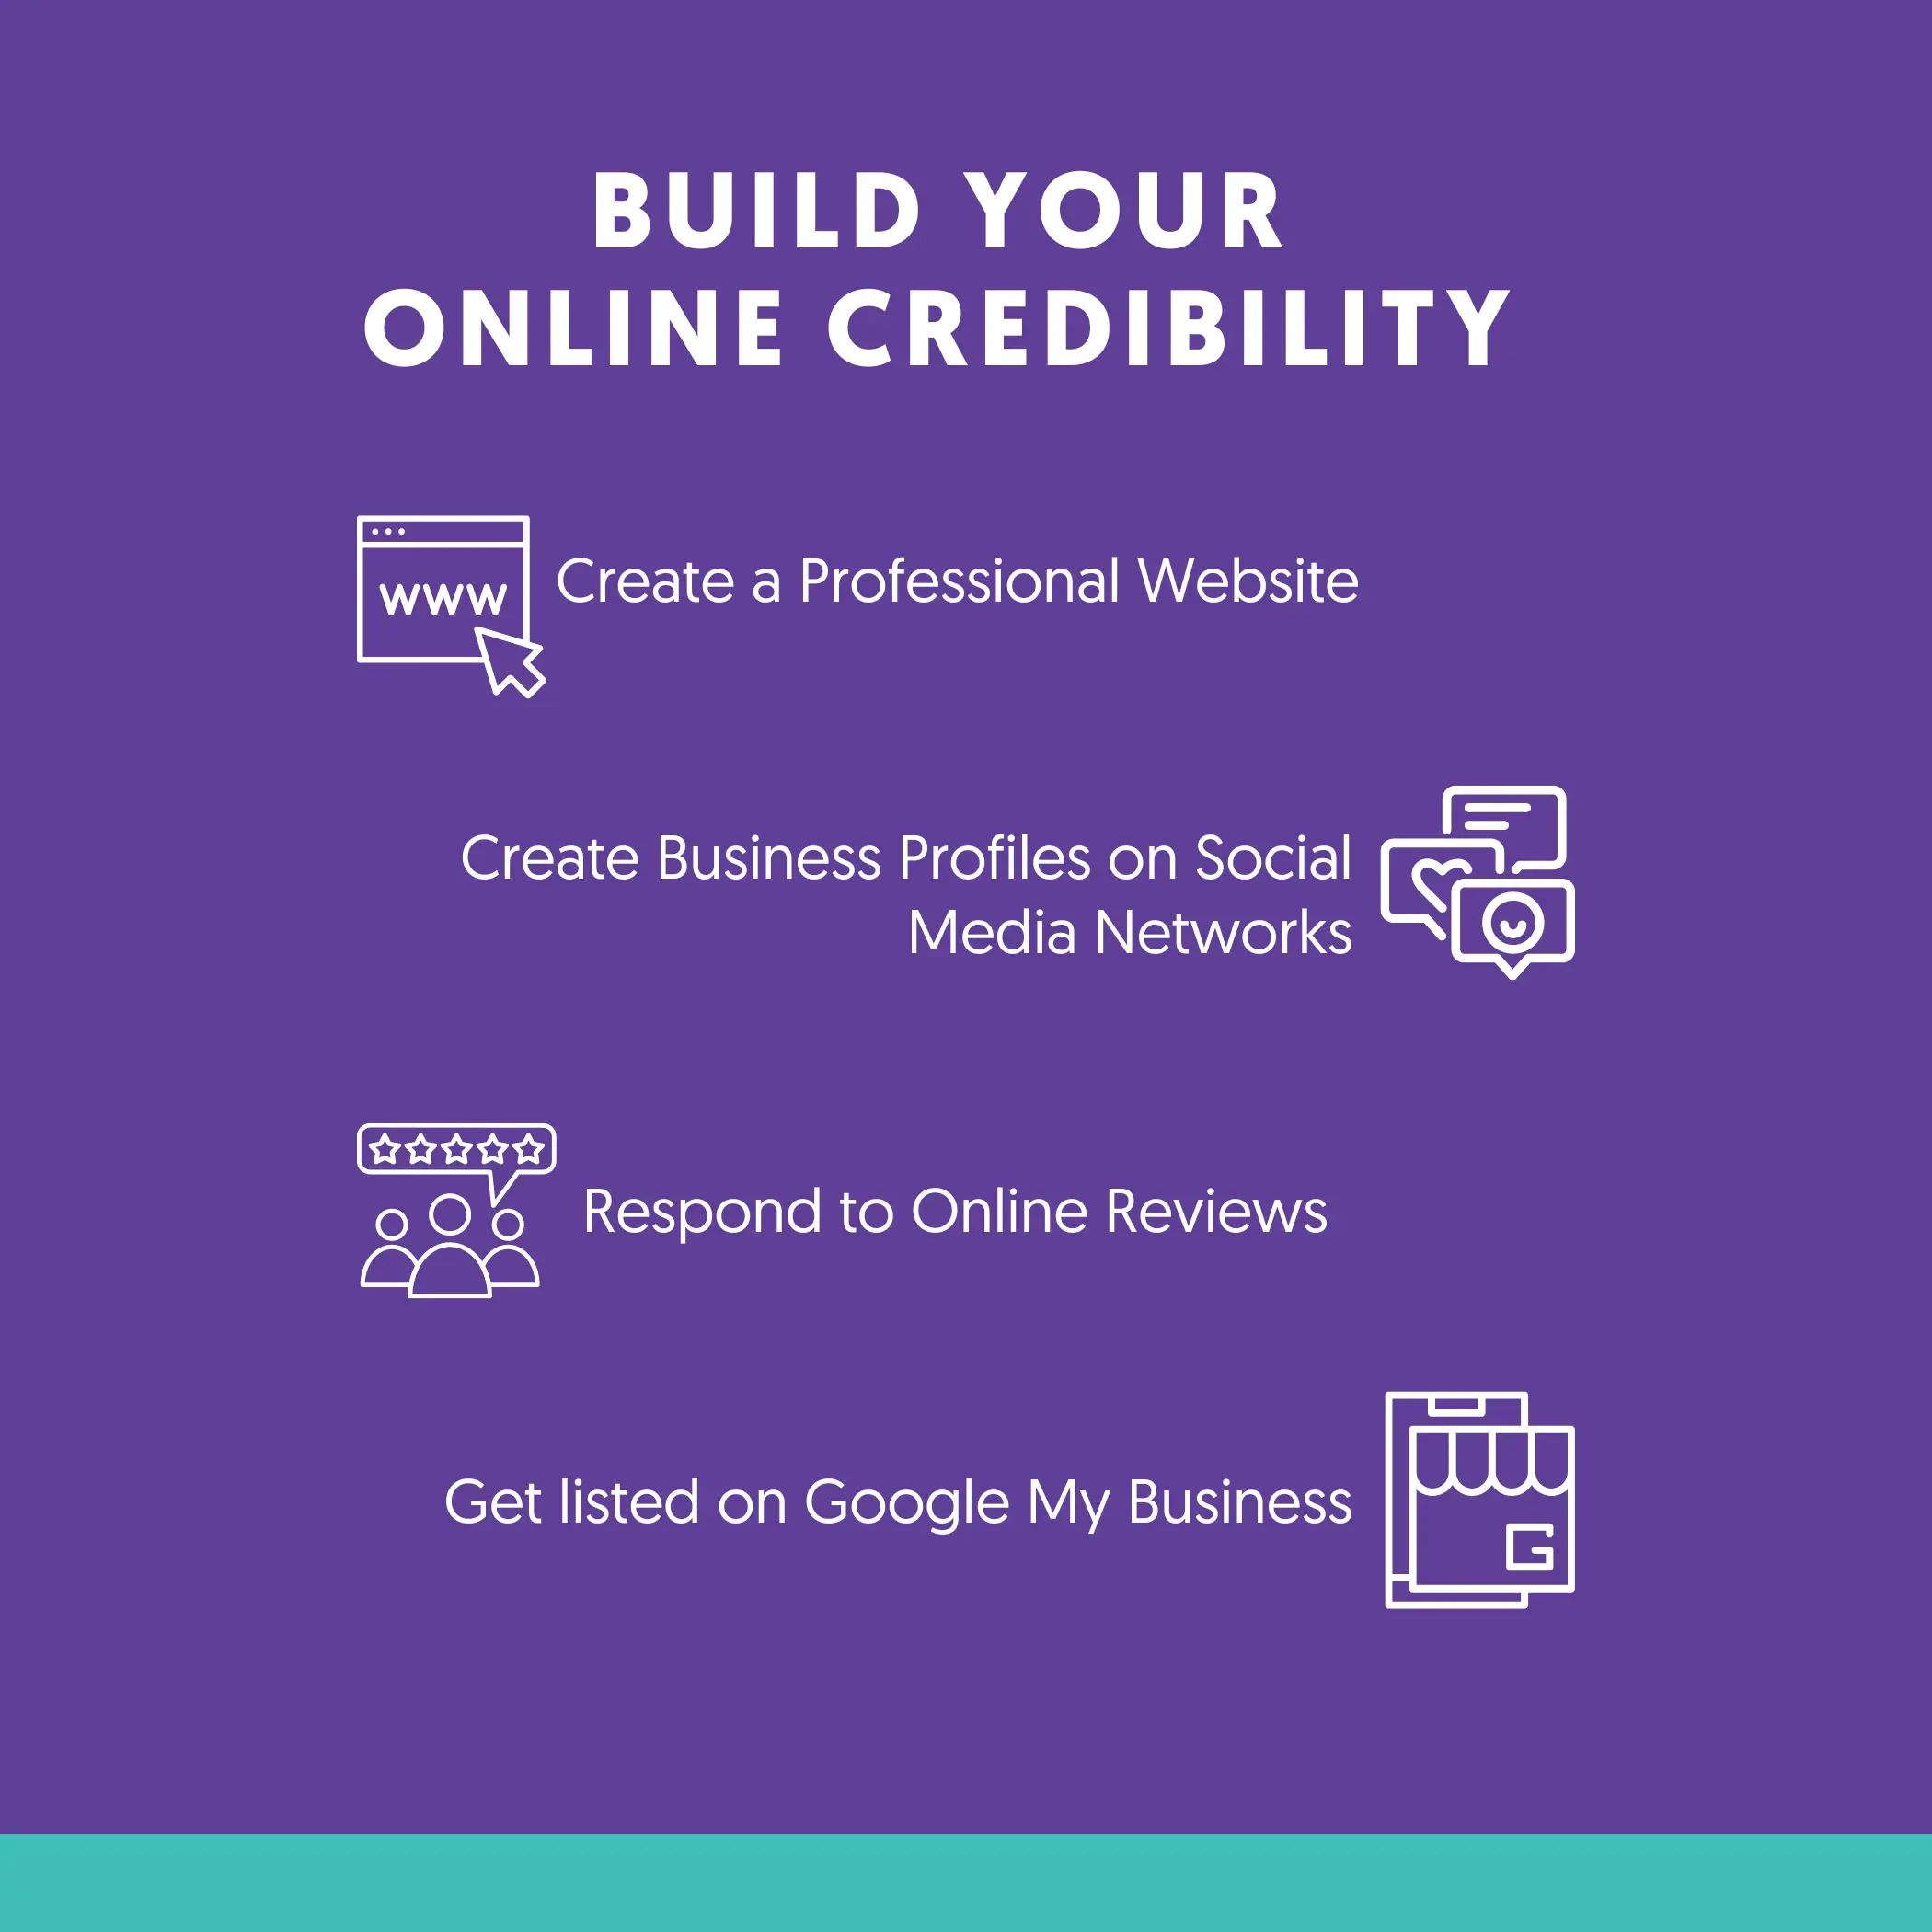 Build Your Online Credibility